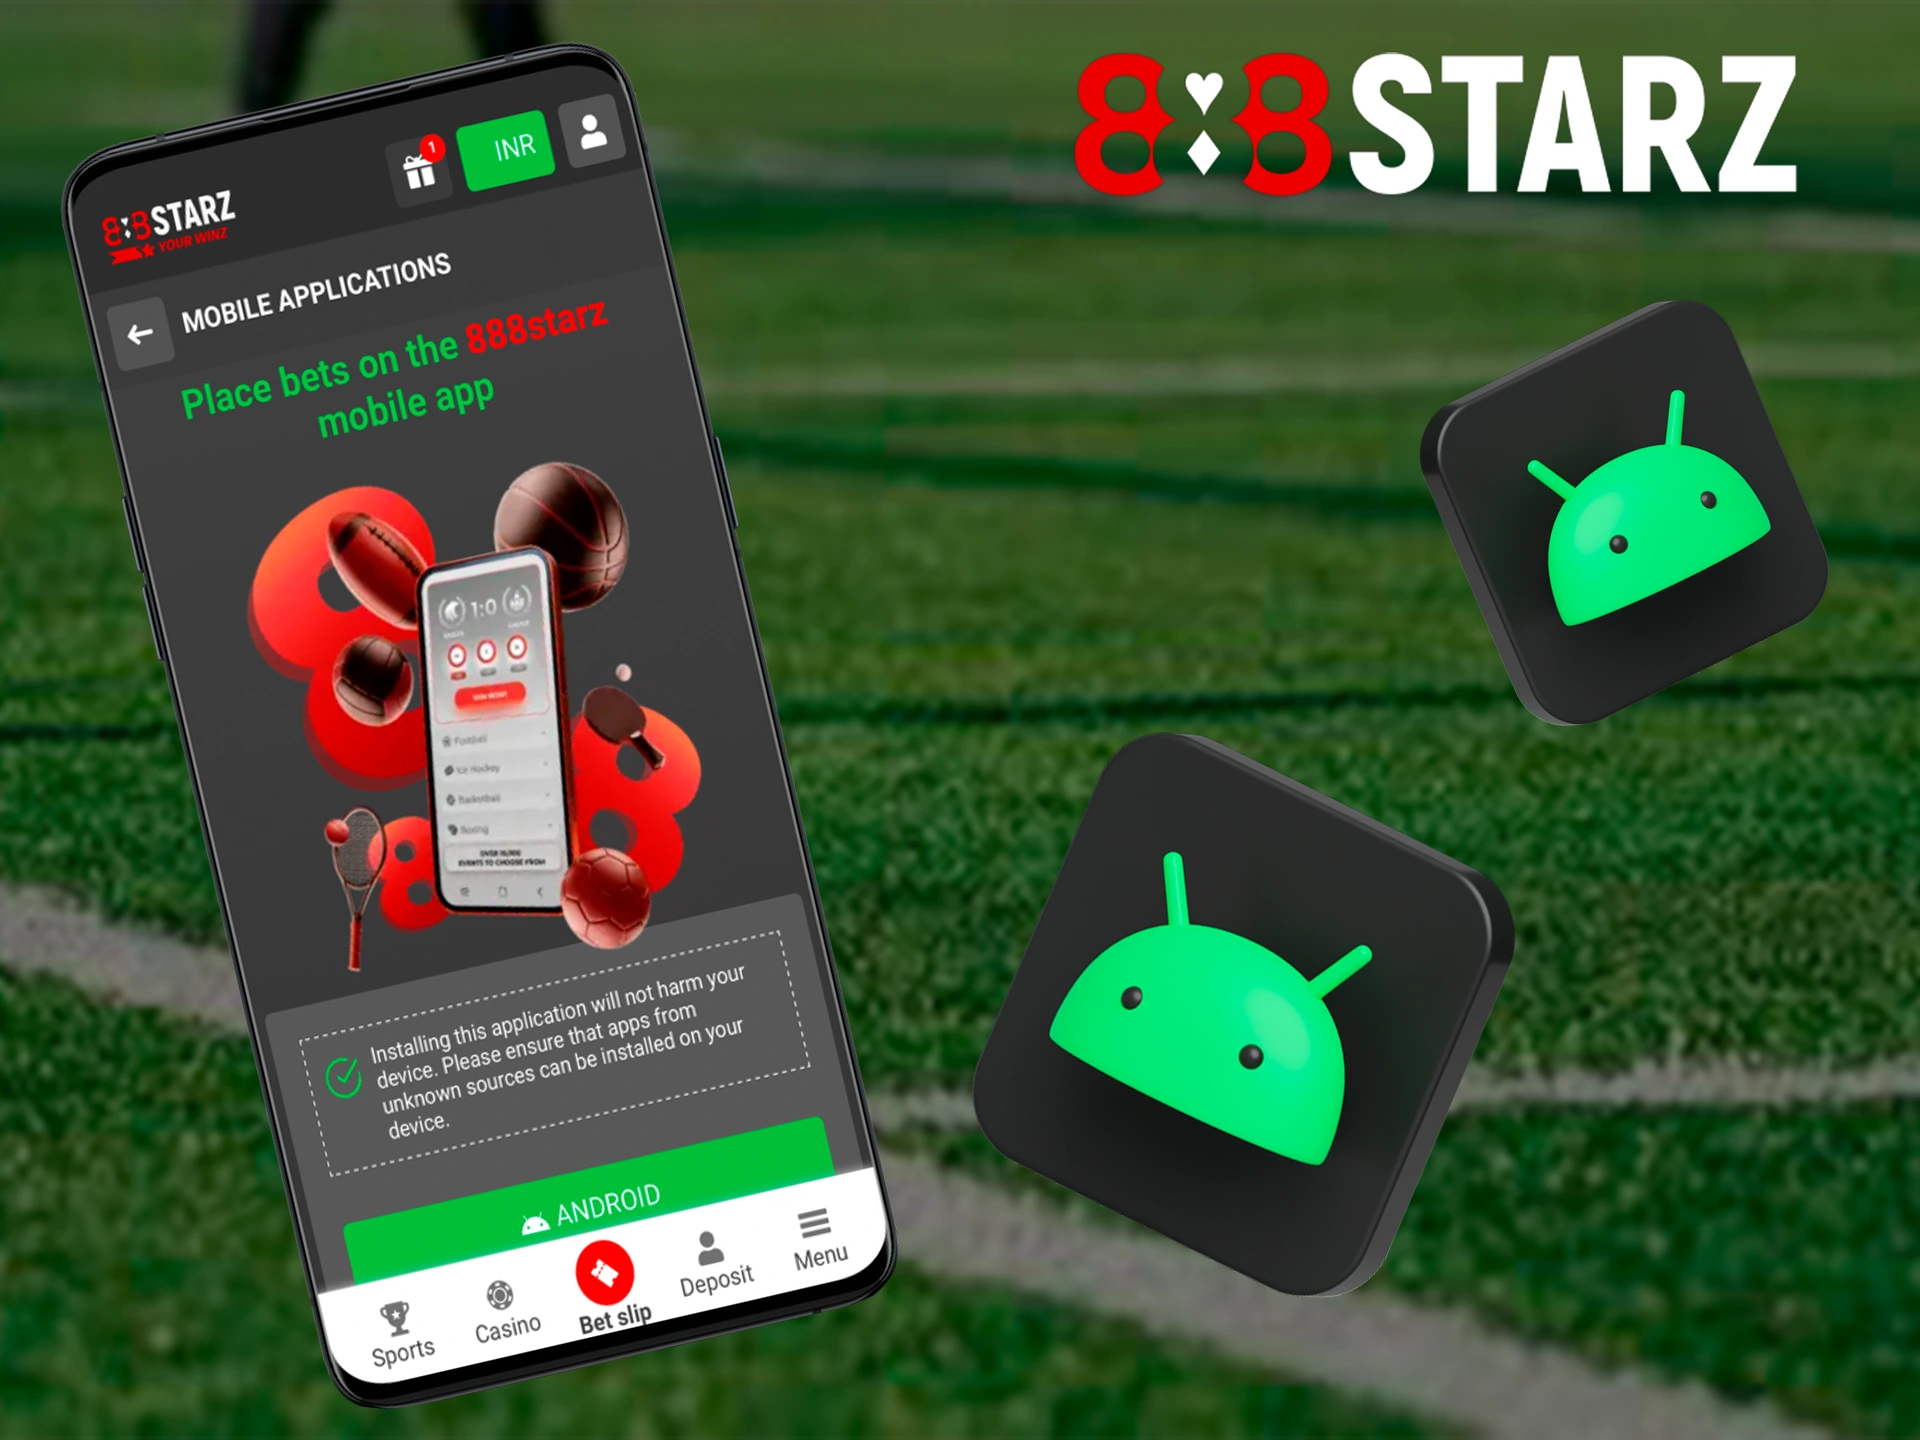 888Starz mobile application is available for most modern Android smartphones for convenient mobile gaming, Download it according to the instructions